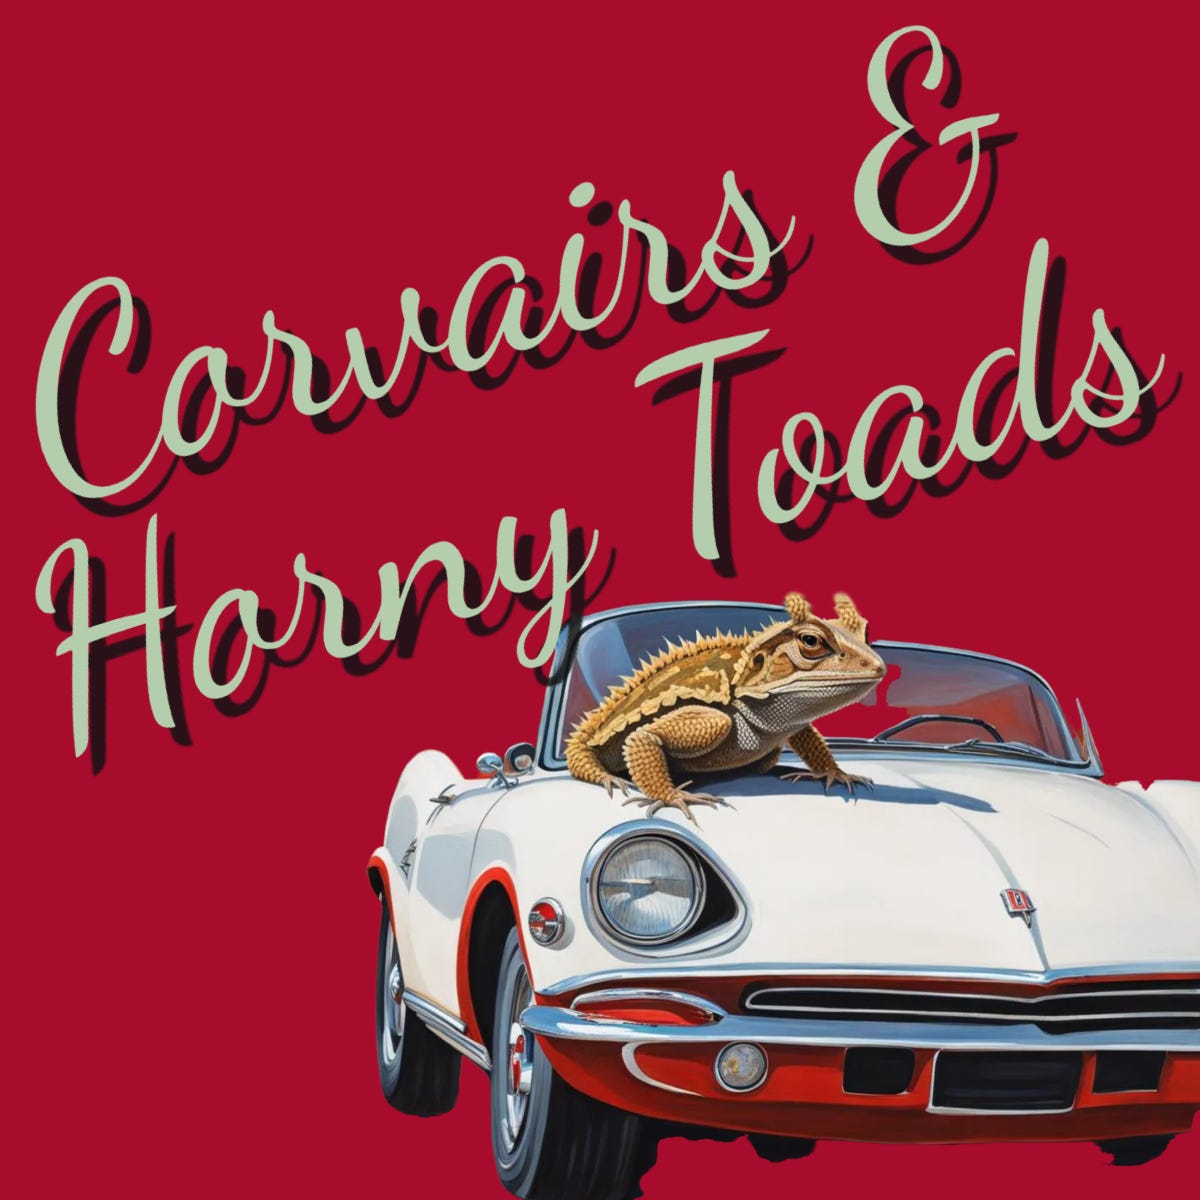 Artwork for Corvairs & Horny Toads